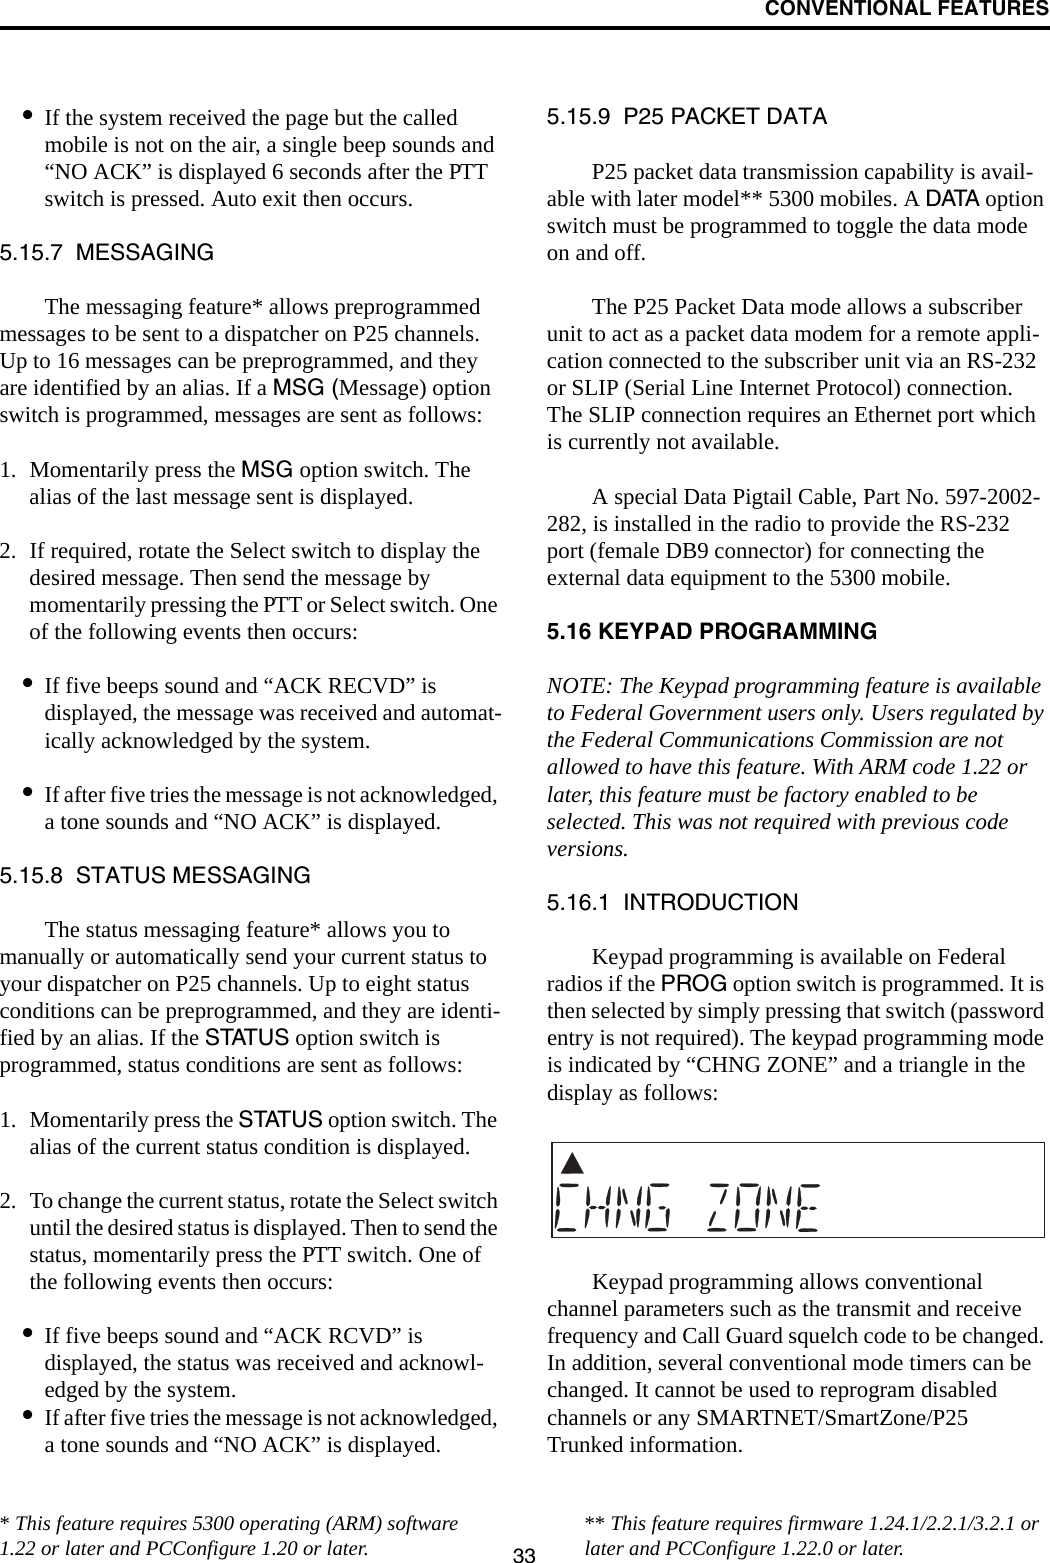 CONVENTIONAL FEATURES33•If the system received the page but the called mobile is not on the air, a single beep sounds and “NO ACK” is displayed 6 seconds after the PTT switch is pressed. Auto exit then occurs.5.15.7  MESSAGINGThe messaging feature* allows preprogrammed messages to be sent to a dispatcher on P25 channels. Up to 16 messages can be preprogrammed, and they are identified by an alias. If a MSG (Message) option switch is programmed, messages are sent as follows:1. Momentarily press the MSG option switch. The alias of the last message sent is displayed.2. If required, rotate the Select switch to display the desired message. Then send the message by momentarily pressing the PTT or Select switch. One of the following events then occurs:•If five beeps sound and “ACK RECVD” is displayed, the message was received and automat-ically acknowledged by the system.•If after five tries the message is not acknowledged, a tone sounds and “NO ACK” is displayed. 5.15.8  STATUS MESSAGINGThe status messaging feature* allows you to manually or automatically send your current status to your dispatcher on P25 channels. Up to eight status conditions can be preprogrammed, and they are identi-fied by an alias. If the STATUS option switch is programmed, status conditions are sent as follows:1. Momentarily press the STATUS option switch. The alias of the current status condition is displayed.2. To change the current status, rotate the Select switch until the desired status is displayed. Then to send the status, momentarily press the PTT switch. One of the following events then occurs:•If five beeps sound and “ACK RCVD” is displayed, the status was received and acknowl-edged by the system.•If after five tries the message is not acknowledged, a tone sounds and “NO ACK” is displayed. 5.15.9  P25 PACKET DATAP25 packet data transmission capability is avail-able with later model** 5300 mobiles. A DATA option switch must be programmed to toggle the data mode on and off. The P25 Packet Data mode allows a subscriber unit to act as a packet data modem for a remote appli-cation connected to the subscriber unit via an RS-232 or SLIP (Serial Line Internet Protocol) connection. The SLIP connection requires an Ethernet port which is currently not available.A special Data Pigtail Cable, Part No. 597-2002-282, is installed in the radio to provide the RS-232 port (female DB9 connector) for connecting the external data equipment to the 5300 mobile. 5.16 KEYPAD PROGRAMMINGNOTE: The Keypad programming feature is available to Federal Government users only. Users regulated by the Federal Communications Commission are not allowed to have this feature. With ARM code 1.22 or later, this feature must be factory enabled to be selected. This was not required with previous code versions.5.16.1  INTRODUCTIONKeypad programming is available on Federal radios if the PROG option switch is programmed. It is then selected by simply pressing that switch (password entry is not required). The keypad programming mode is indicated by “CHNG ZONE” and a triangle in the display as follows:Keypad programming allows conventional channel parameters such as the transmit and receive frequency and Call Guard squelch code to be changed. In addition, several conventional mode timers can be changed. It cannot be used to reprogram disabled channels or any SMARTNET/SmartZone/P25 Trunked information.* This feature requires 5300 operating (ARM) software 1.22 or later and PCConfigure 1.20 or later. ** This feature requires firmware 1.24.1/2.2.1/3.2.1 or later and PCConfigure 1.22.0 or later.